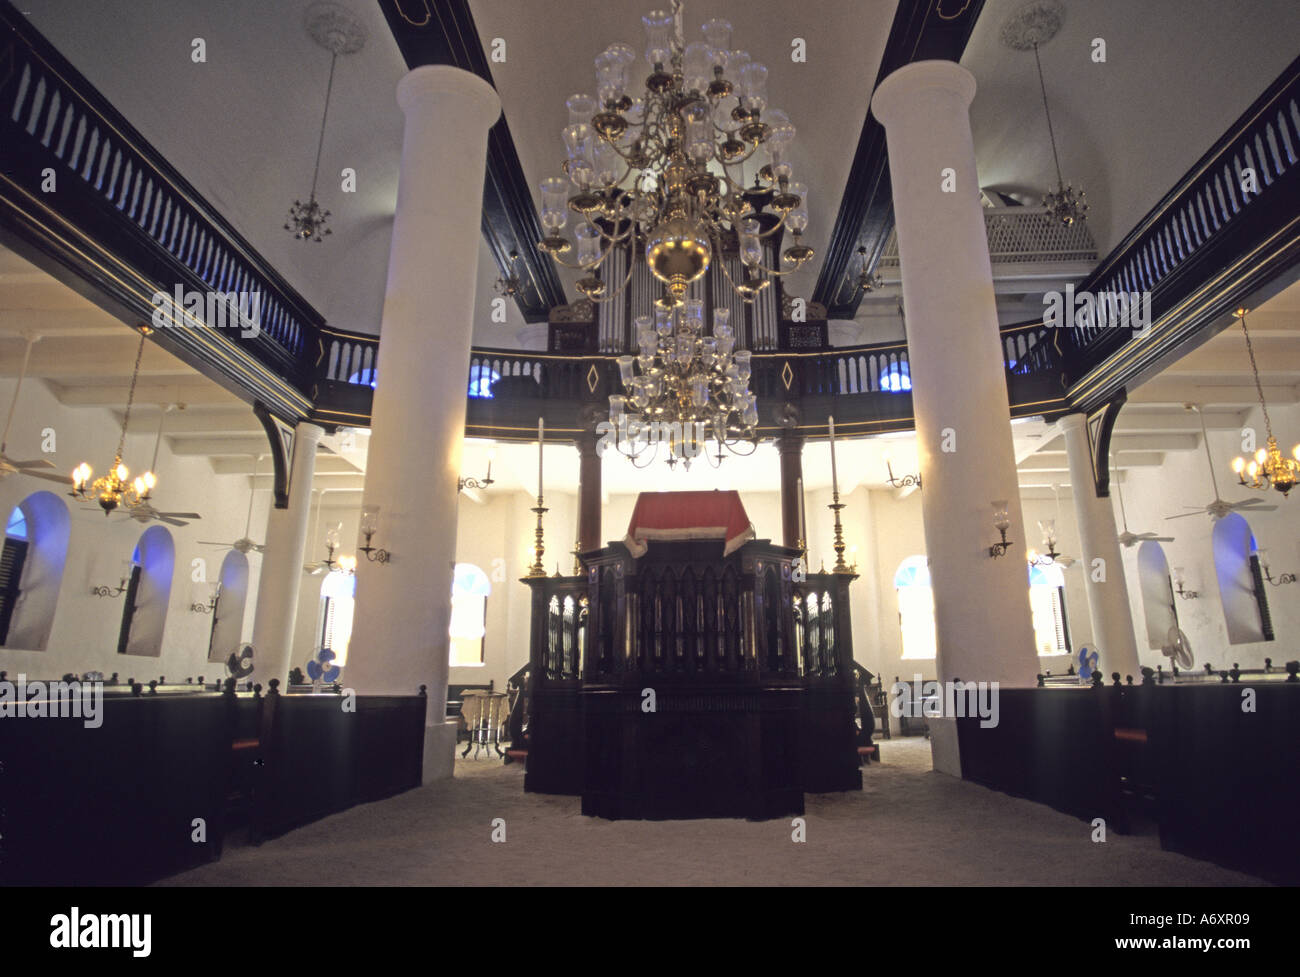 Caribbean, Curacao, Willemstad. Mikve Israel Emanuel Synagogue Oldest Temple in Western Hemisphere Stock Photo